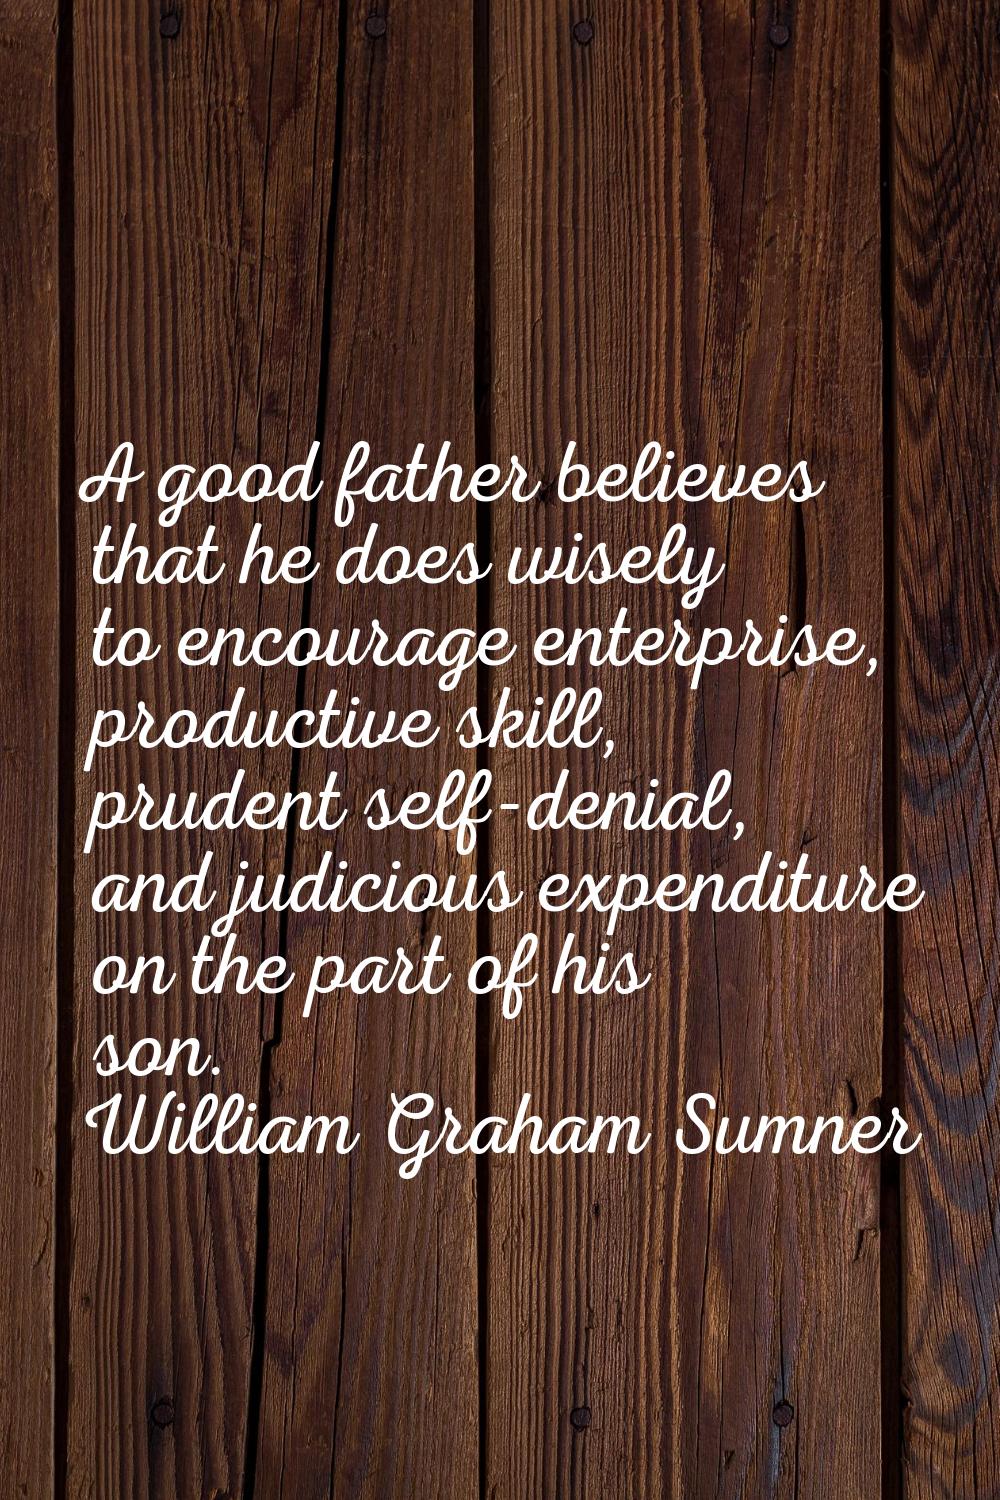 A good father believes that he does wisely to encourage enterprise, productive skill, prudent self-